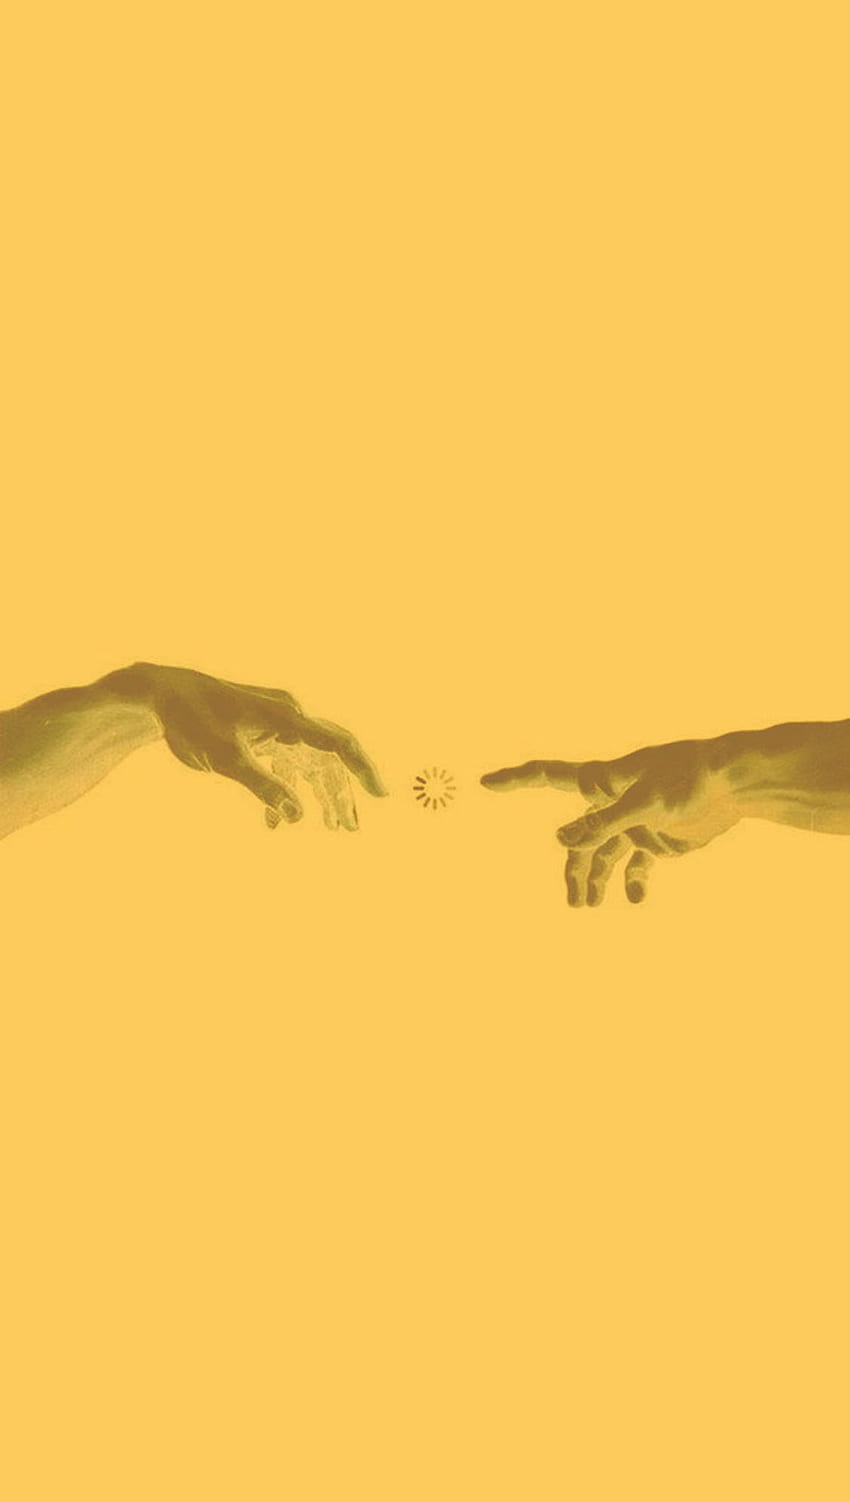 The hand of god and man - Yellow